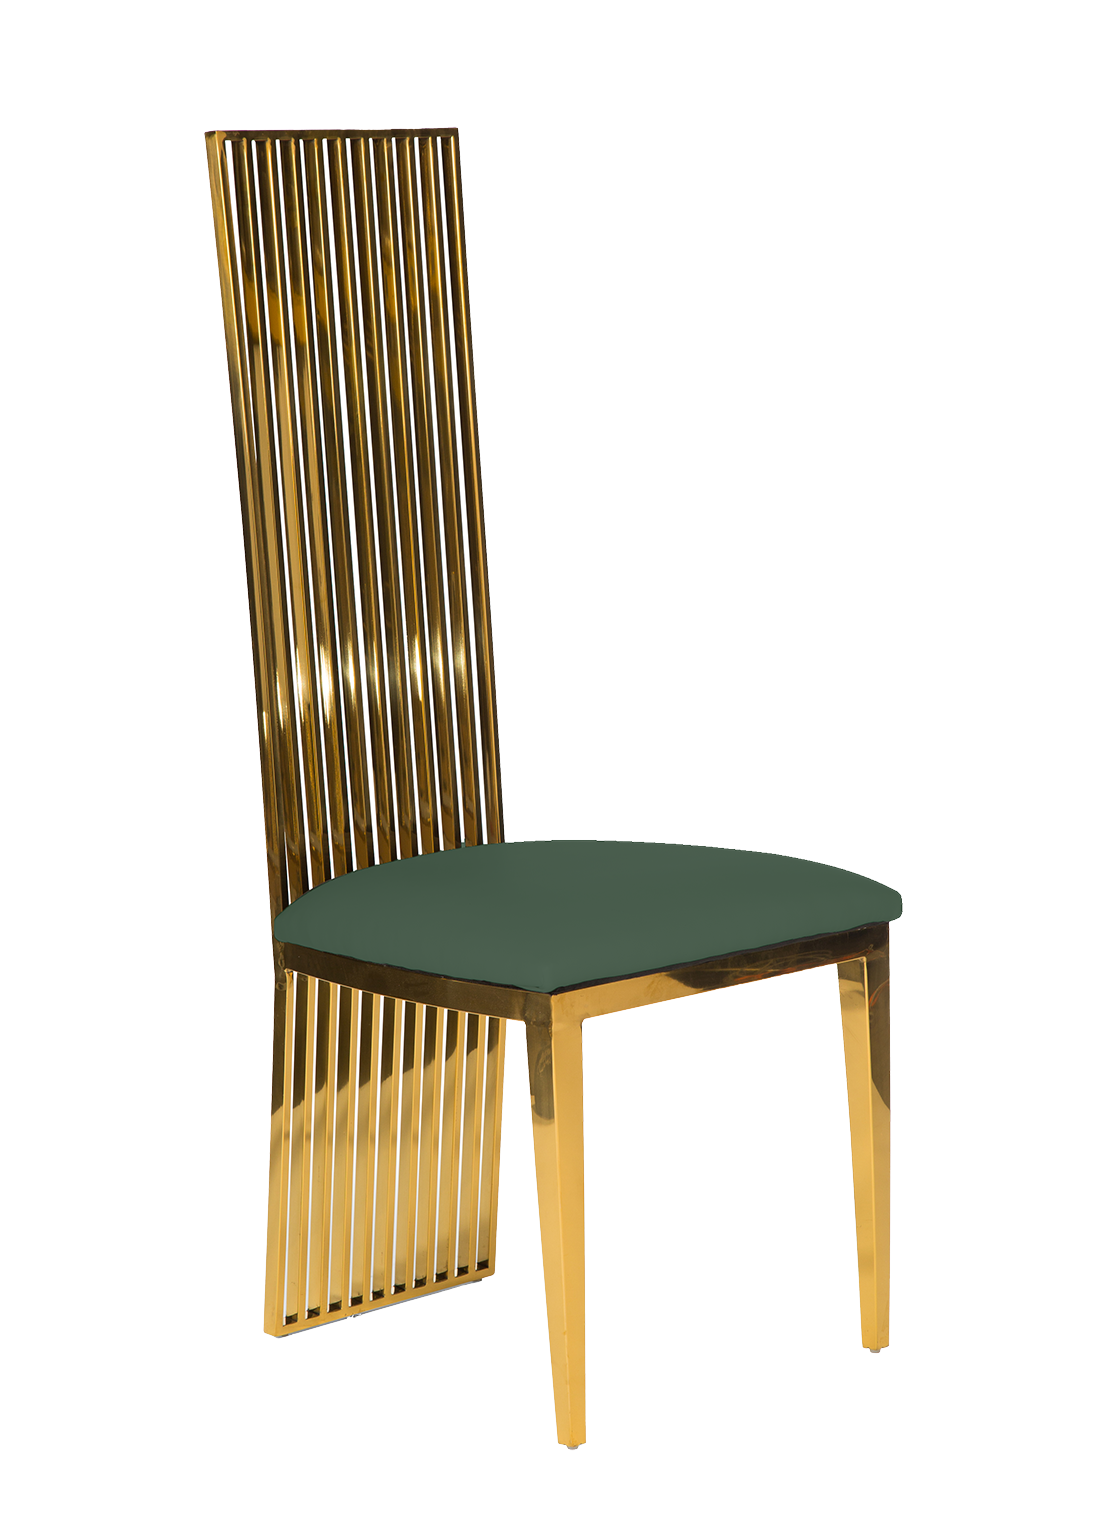 A modern chair with a high, vertical slatted backrest and glossy gold finish. the seat is cushioned with a dark green fabric, set against an isolated white background.